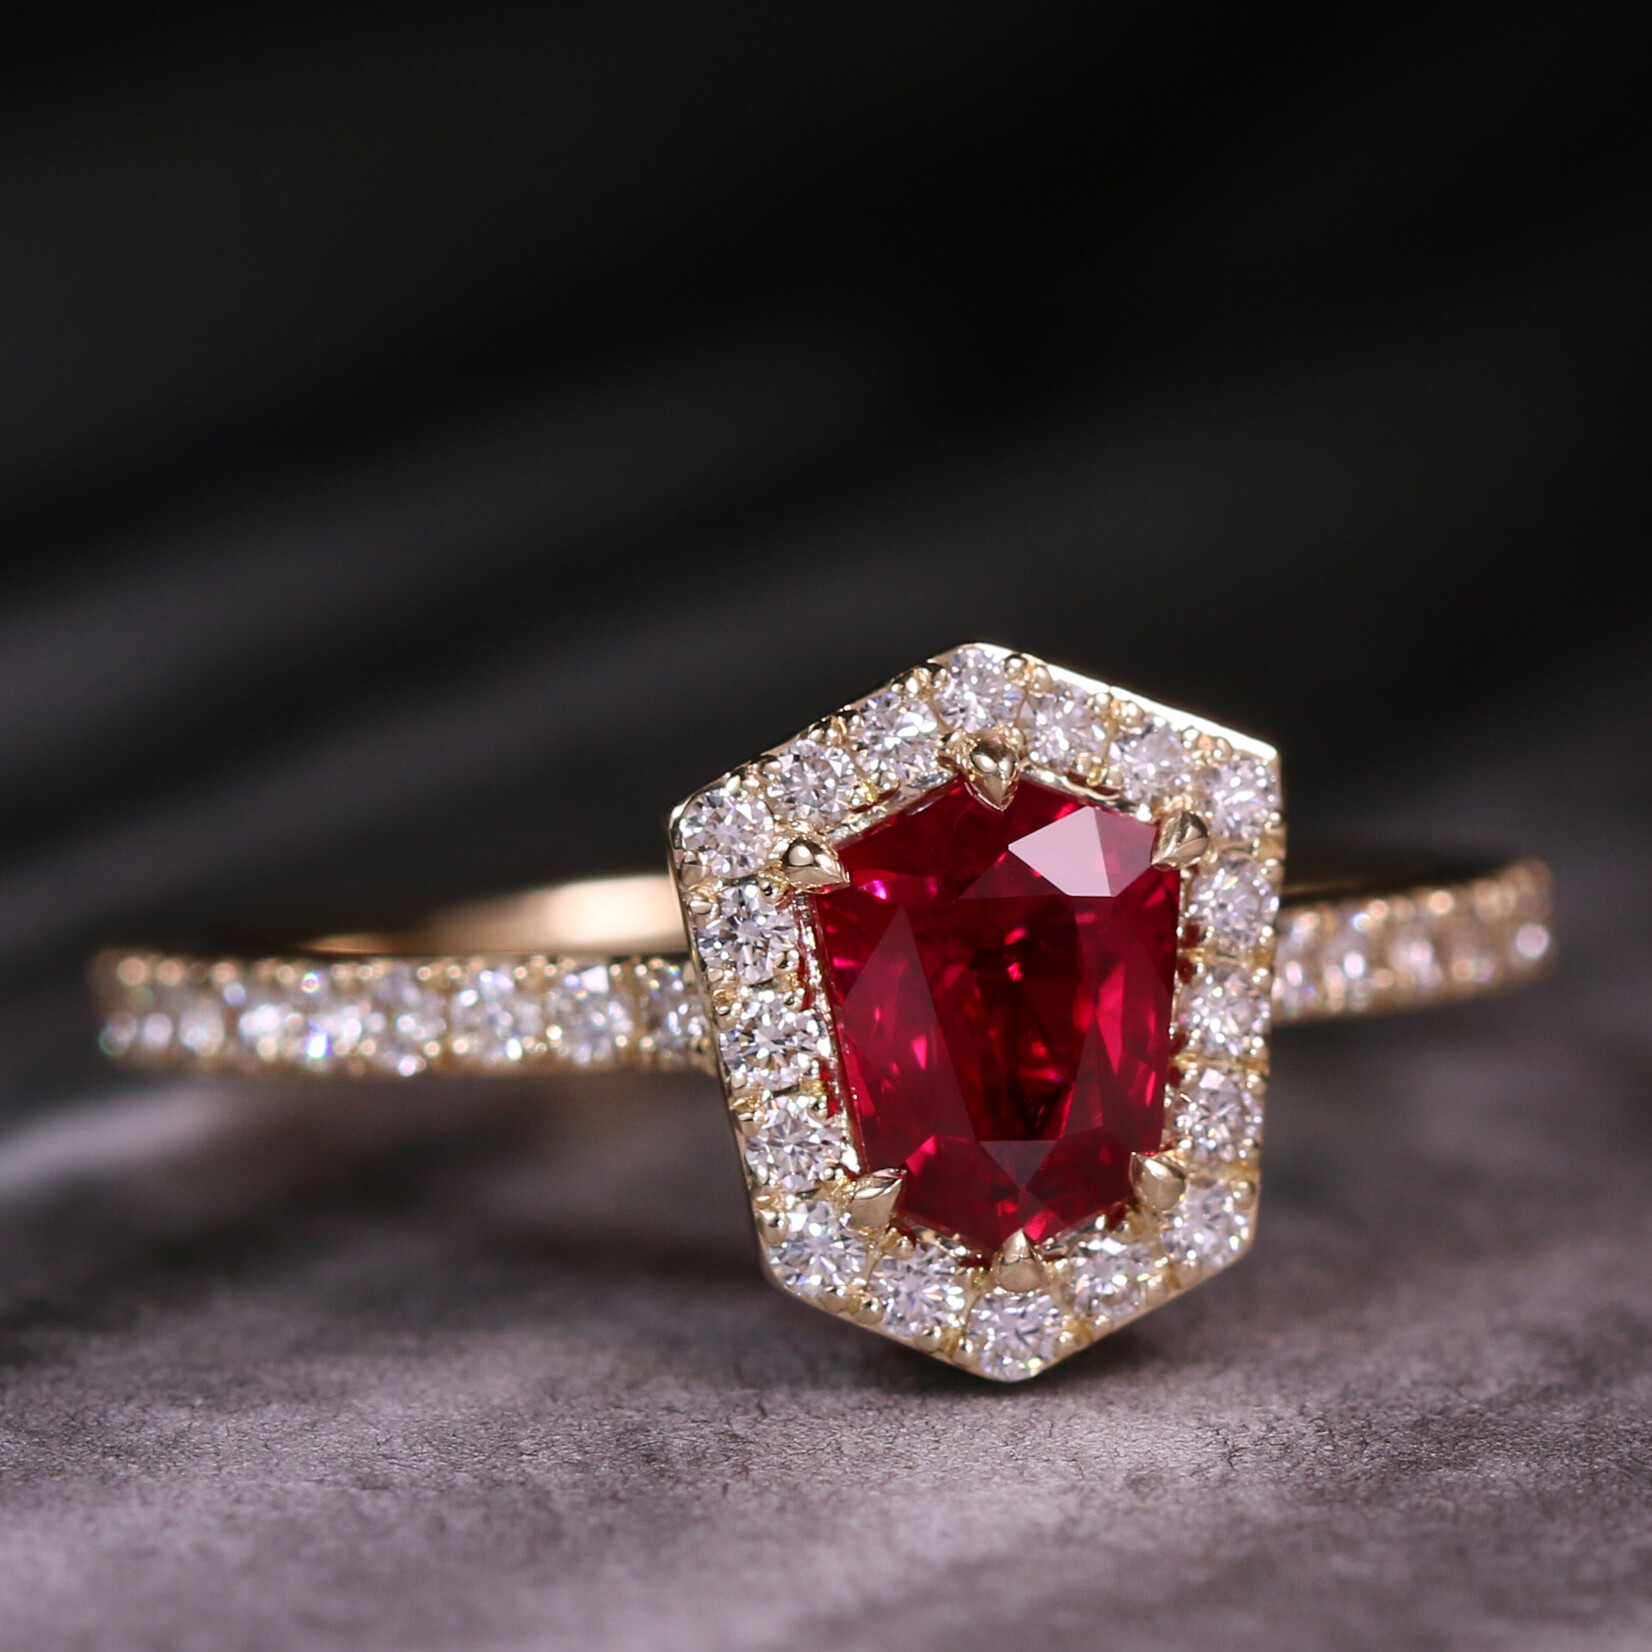 Baxter Moerman Kinsley Ring with Ruby Shield